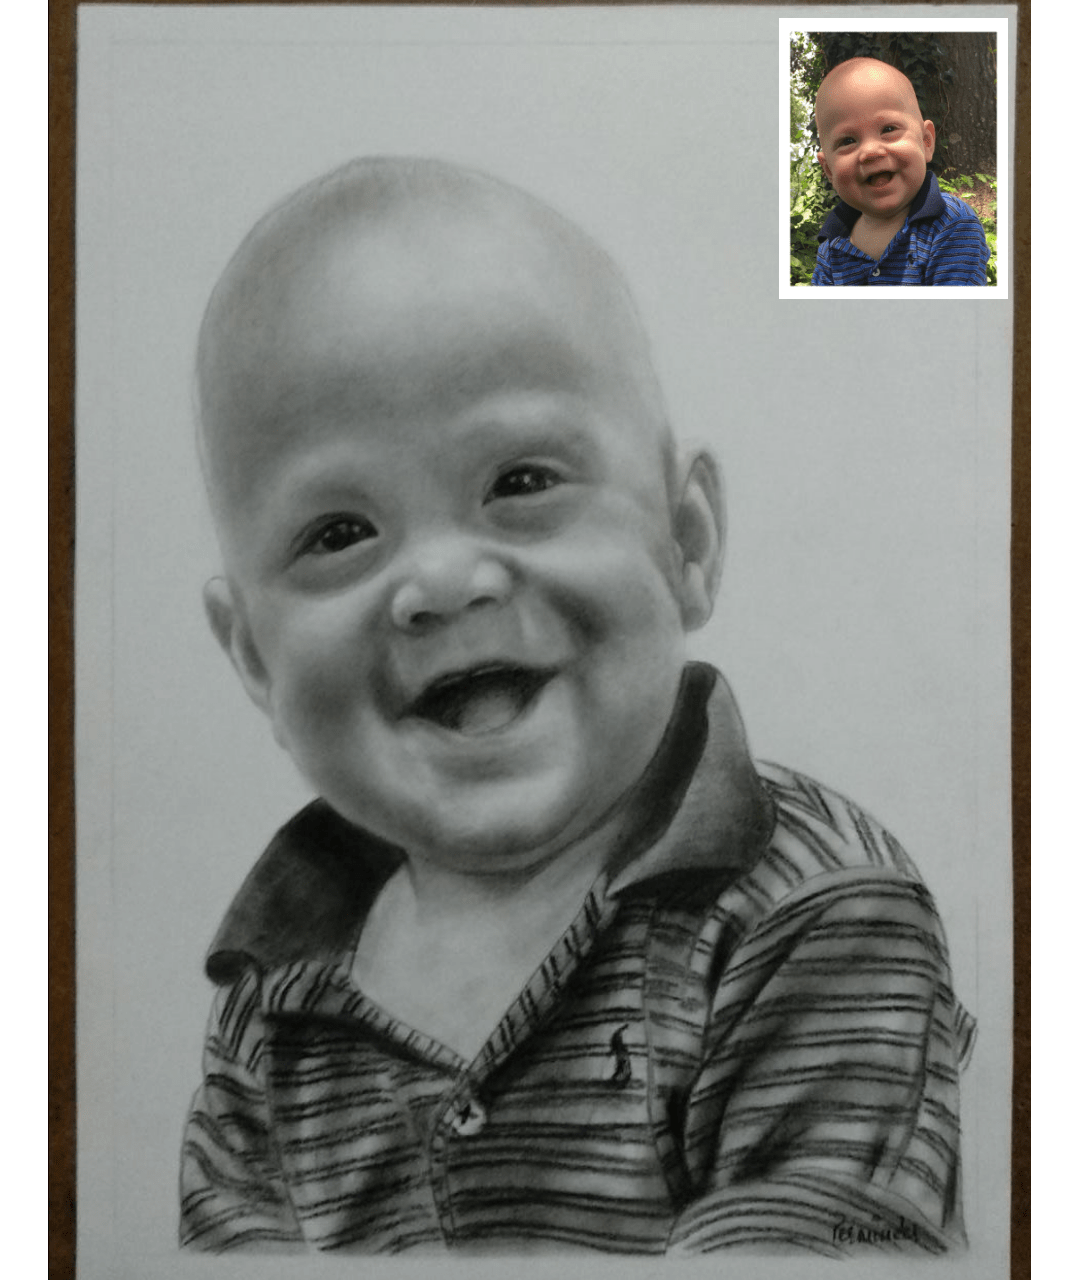 Baby Charcoal Drawing From Photo